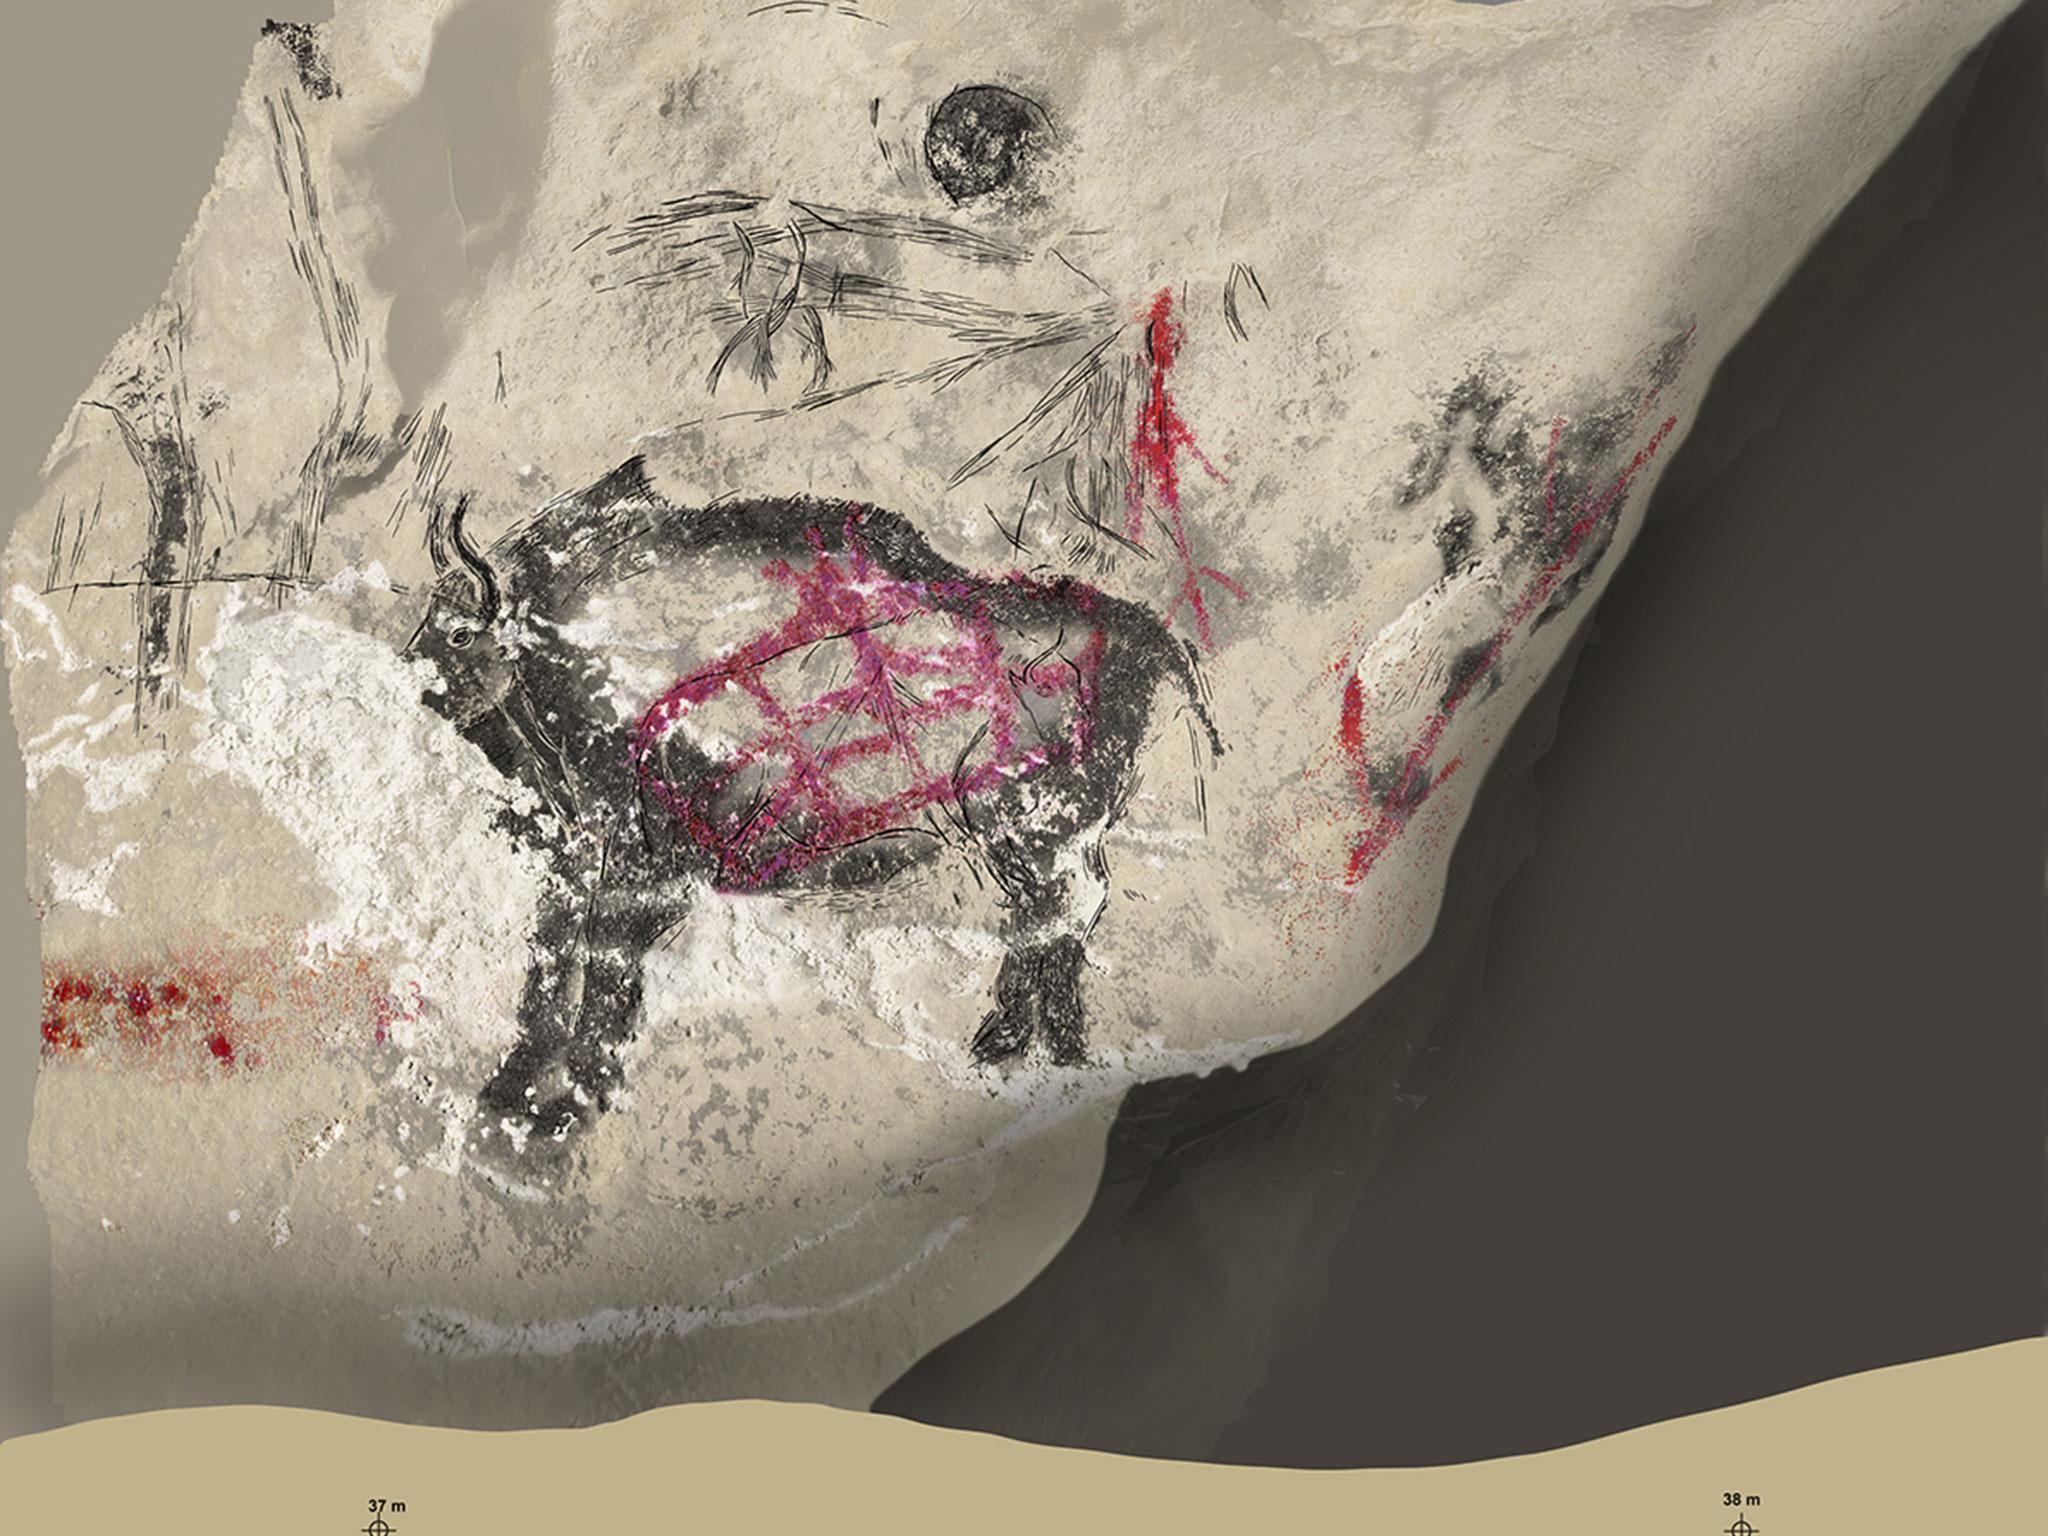 A reproduction of a putative wisent painted in the Marsoulas cave in Haute-Garonne, France